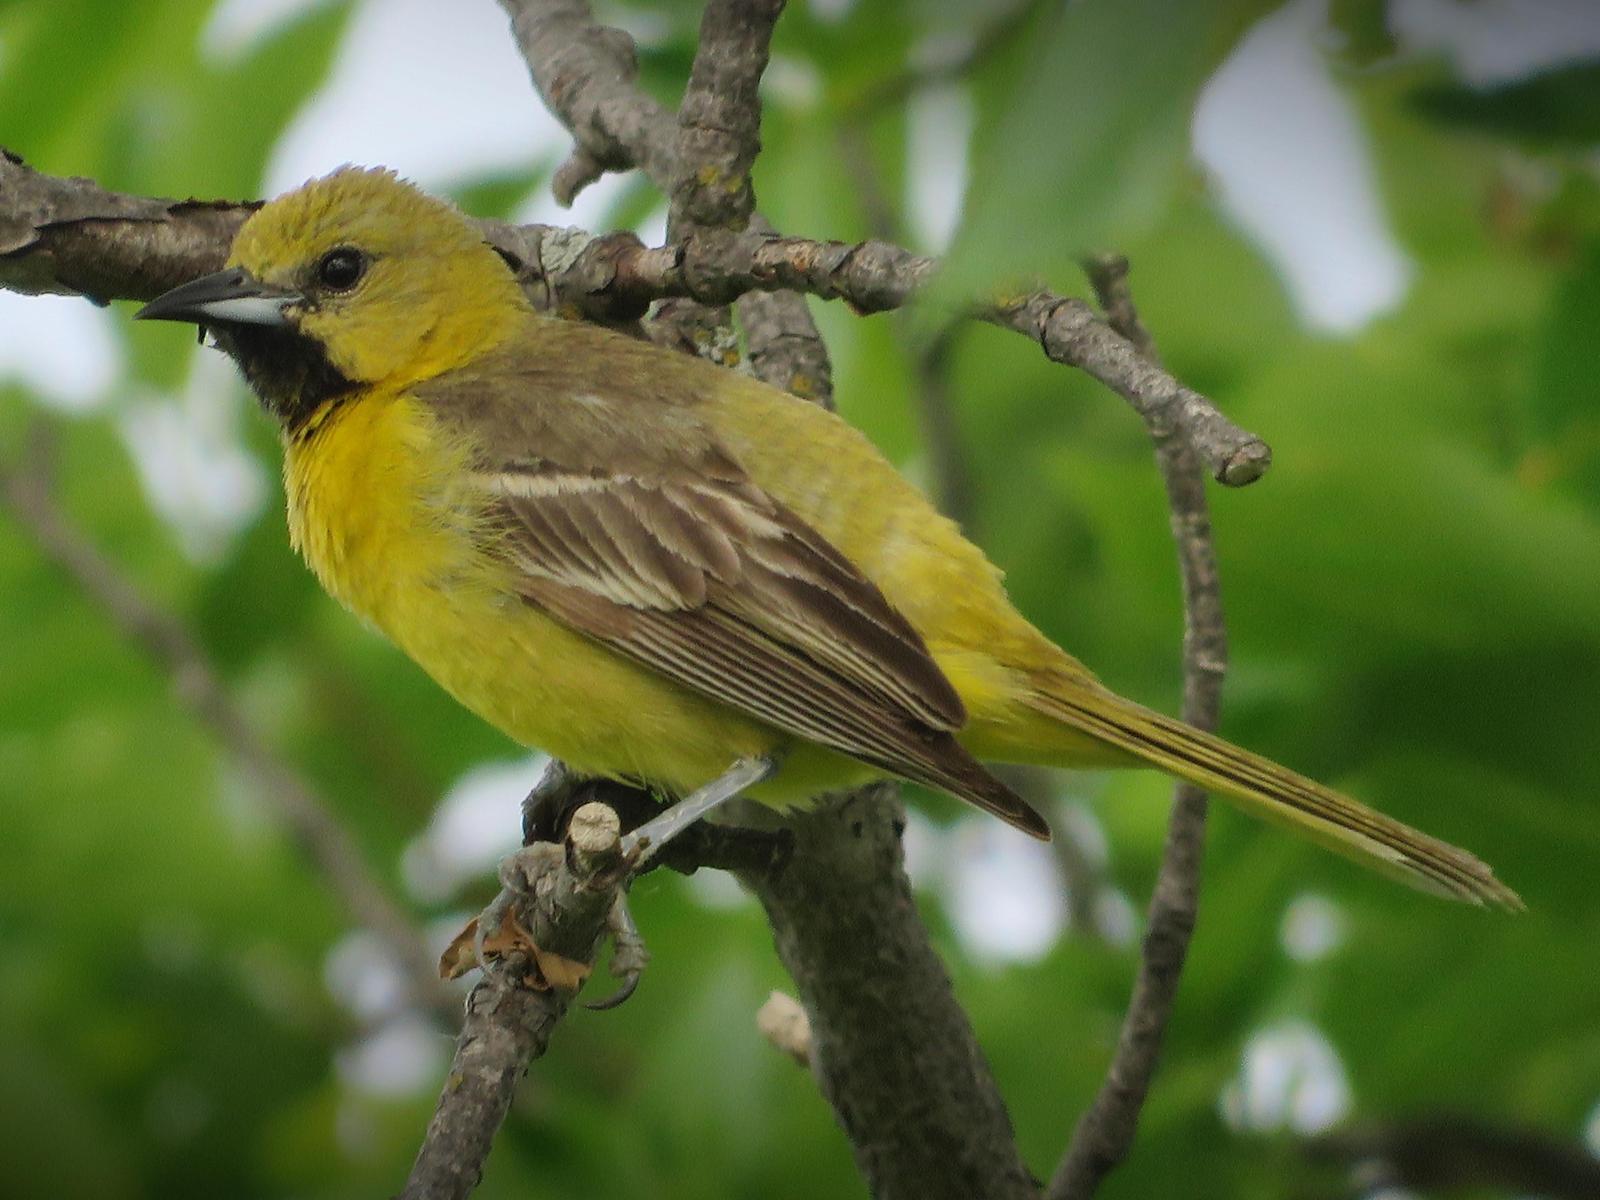 Orchard Oriole Photo by Bob Neugebauer